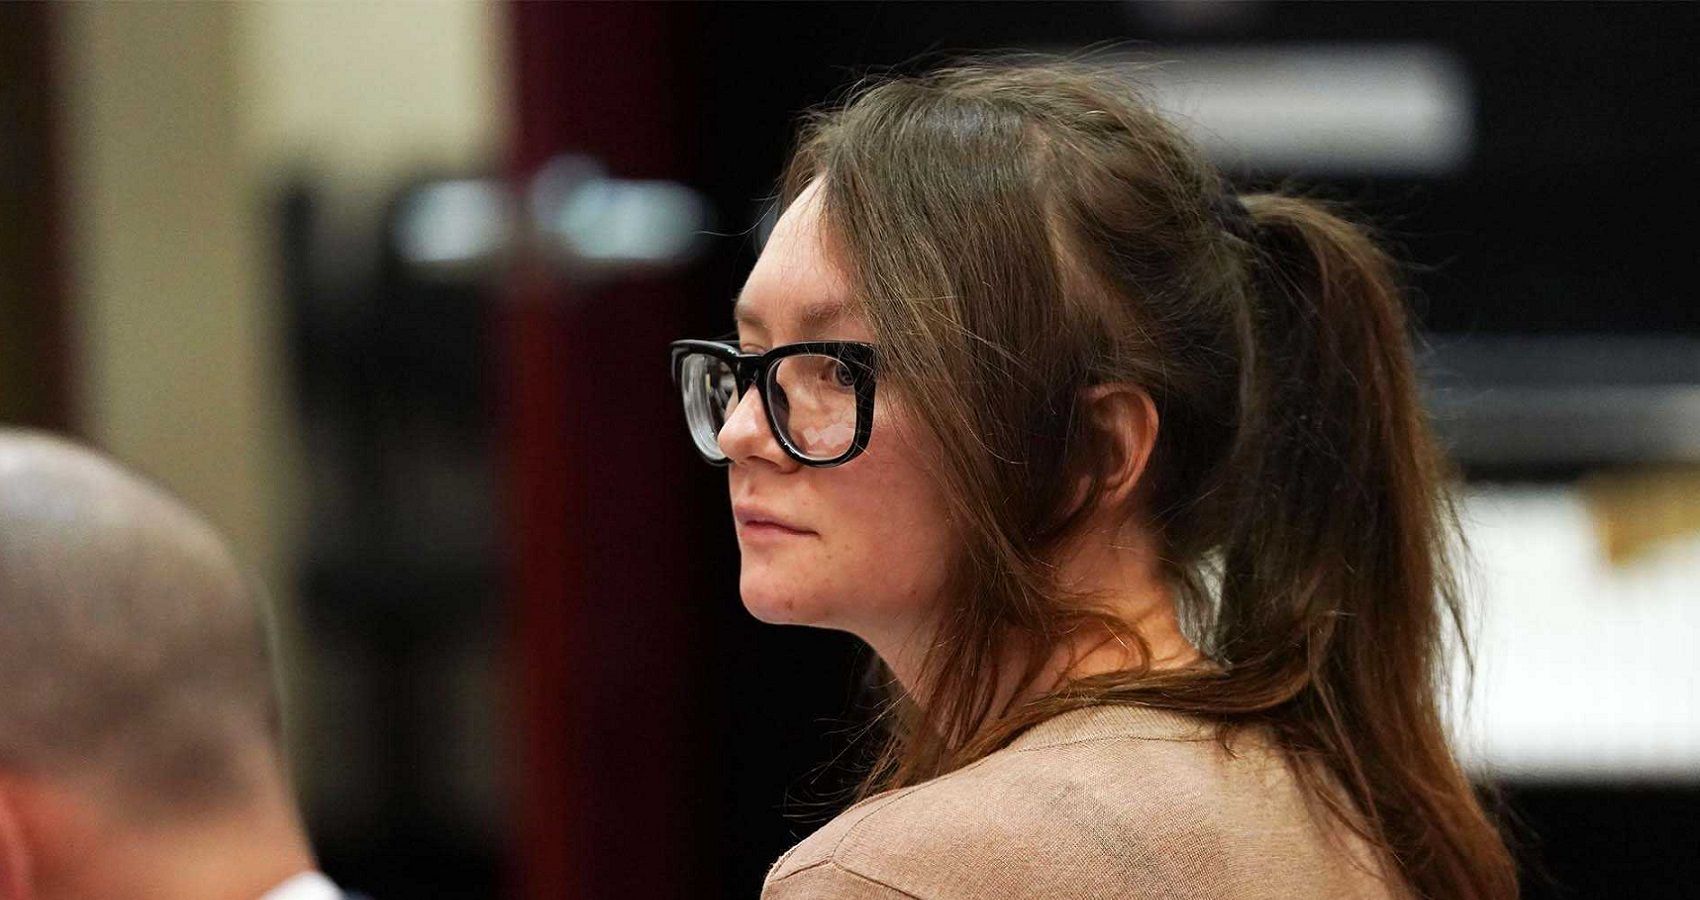 Anna Delvey's Parents Have Some Brutal Thoughts About Their Daughter